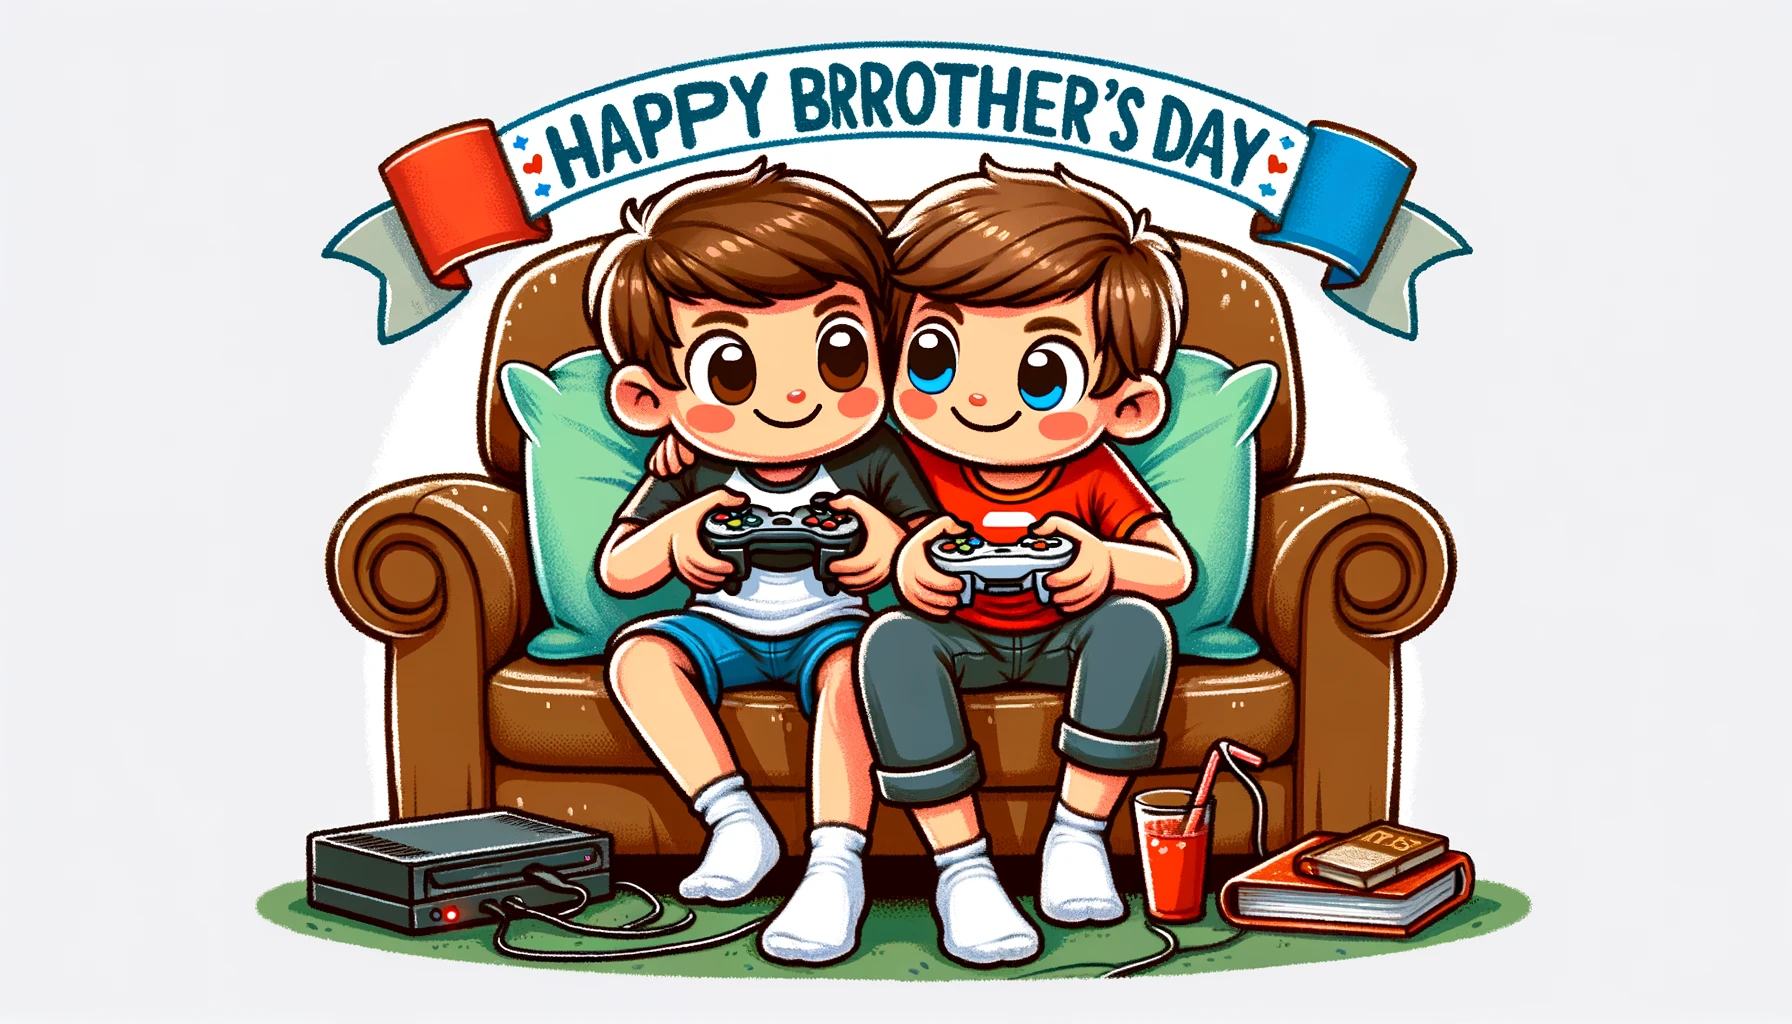 Deepest Brother's Day Quotes for Him